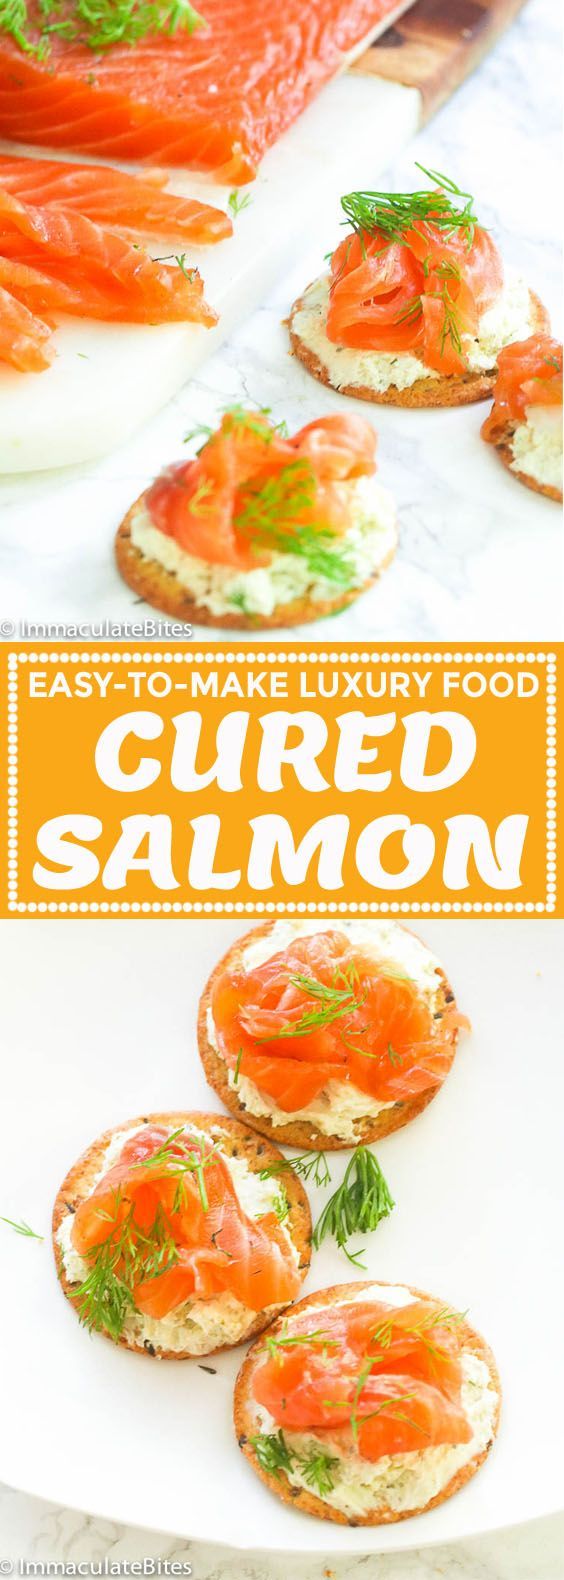 Cured Salmon Gravlax - Immaculate Bites -   18 healthy recipes Salmon appetizers ideas